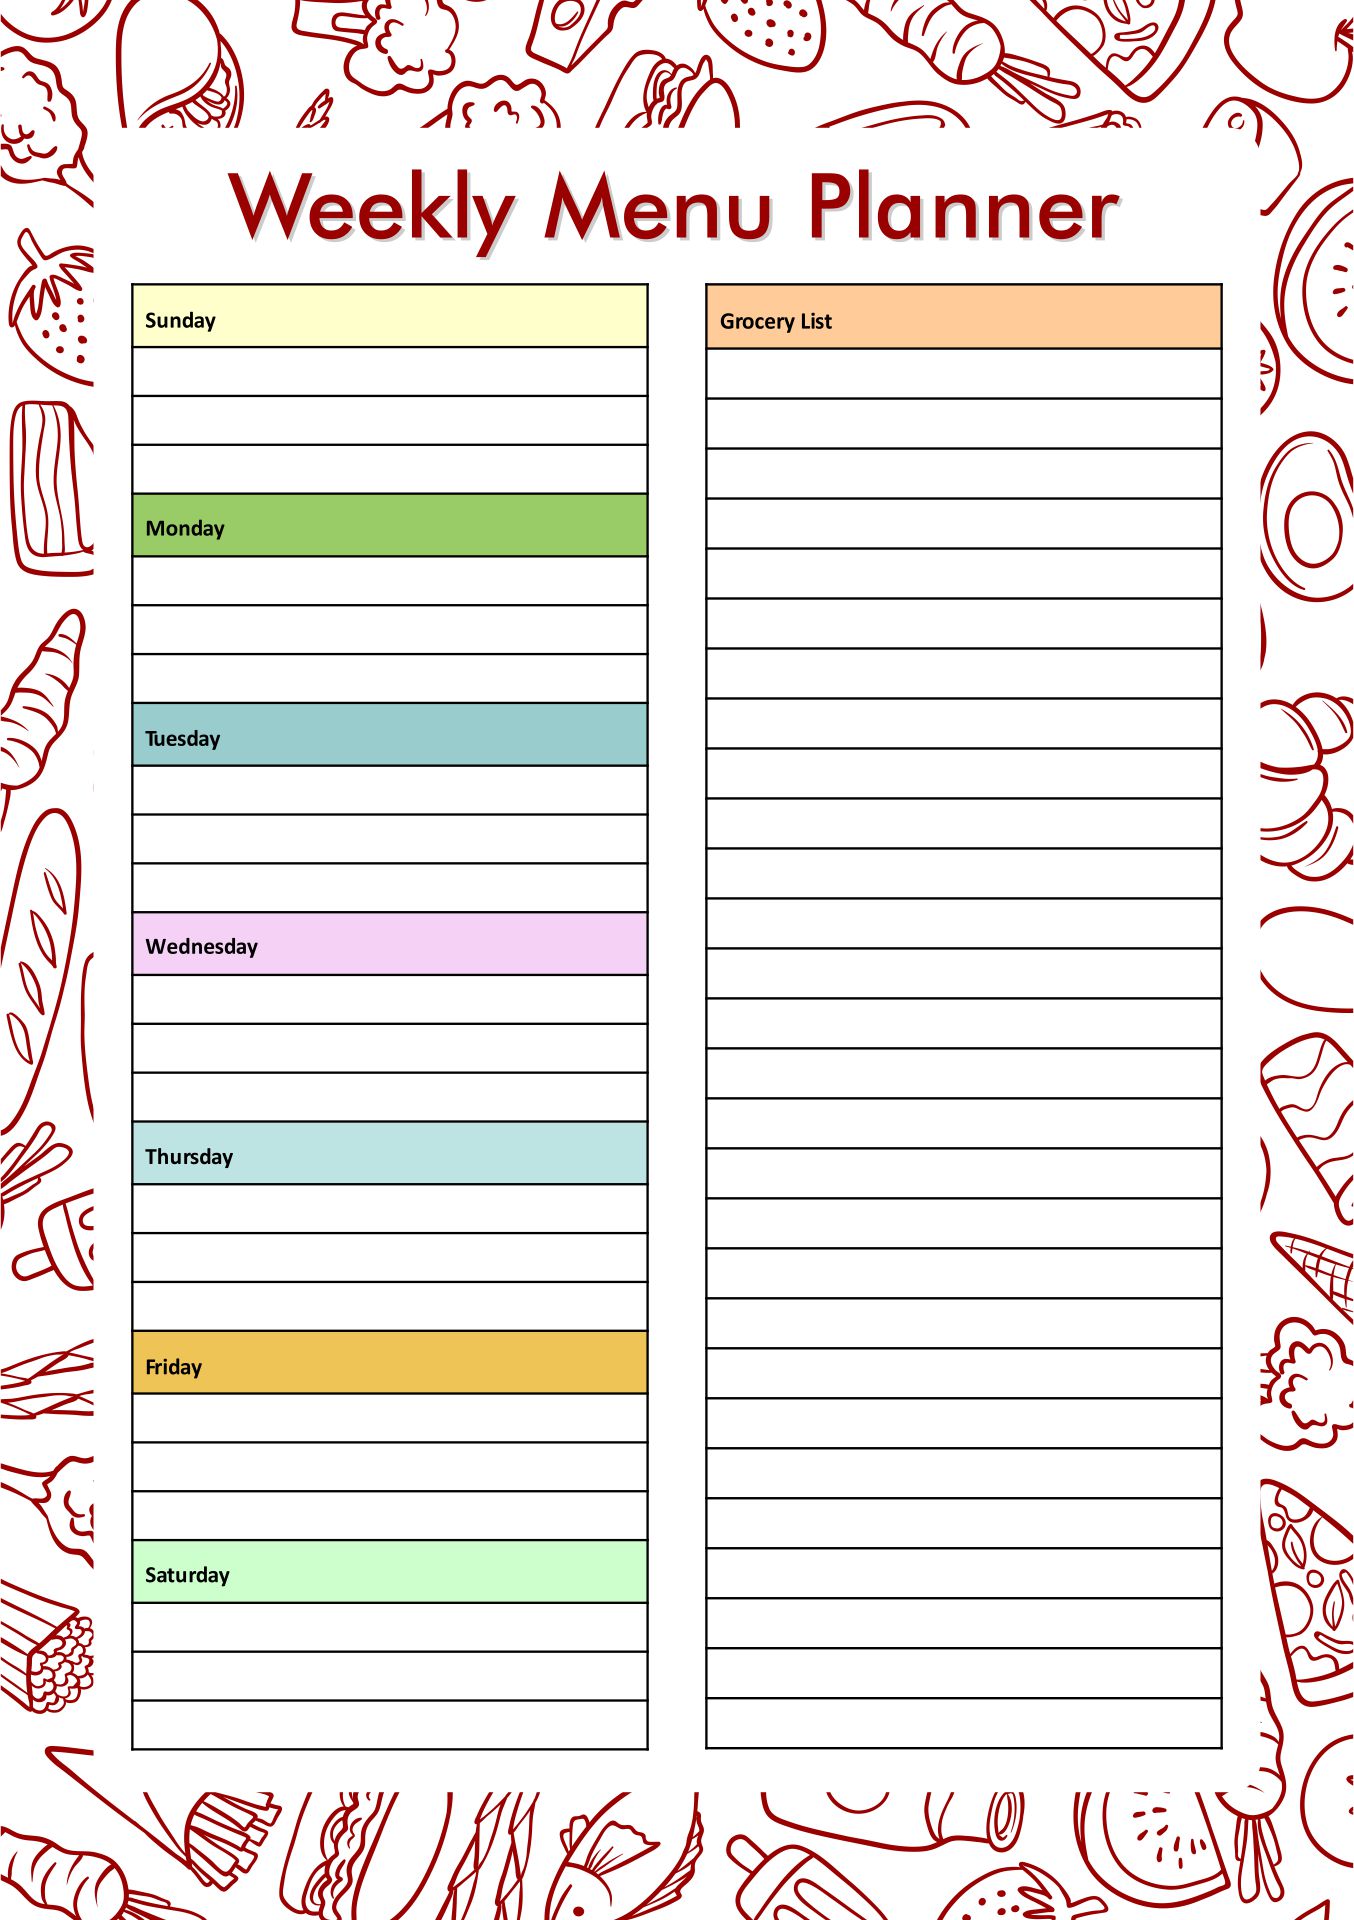 6-best-images-of-free-printable-meal-planner-calorie-free-printables